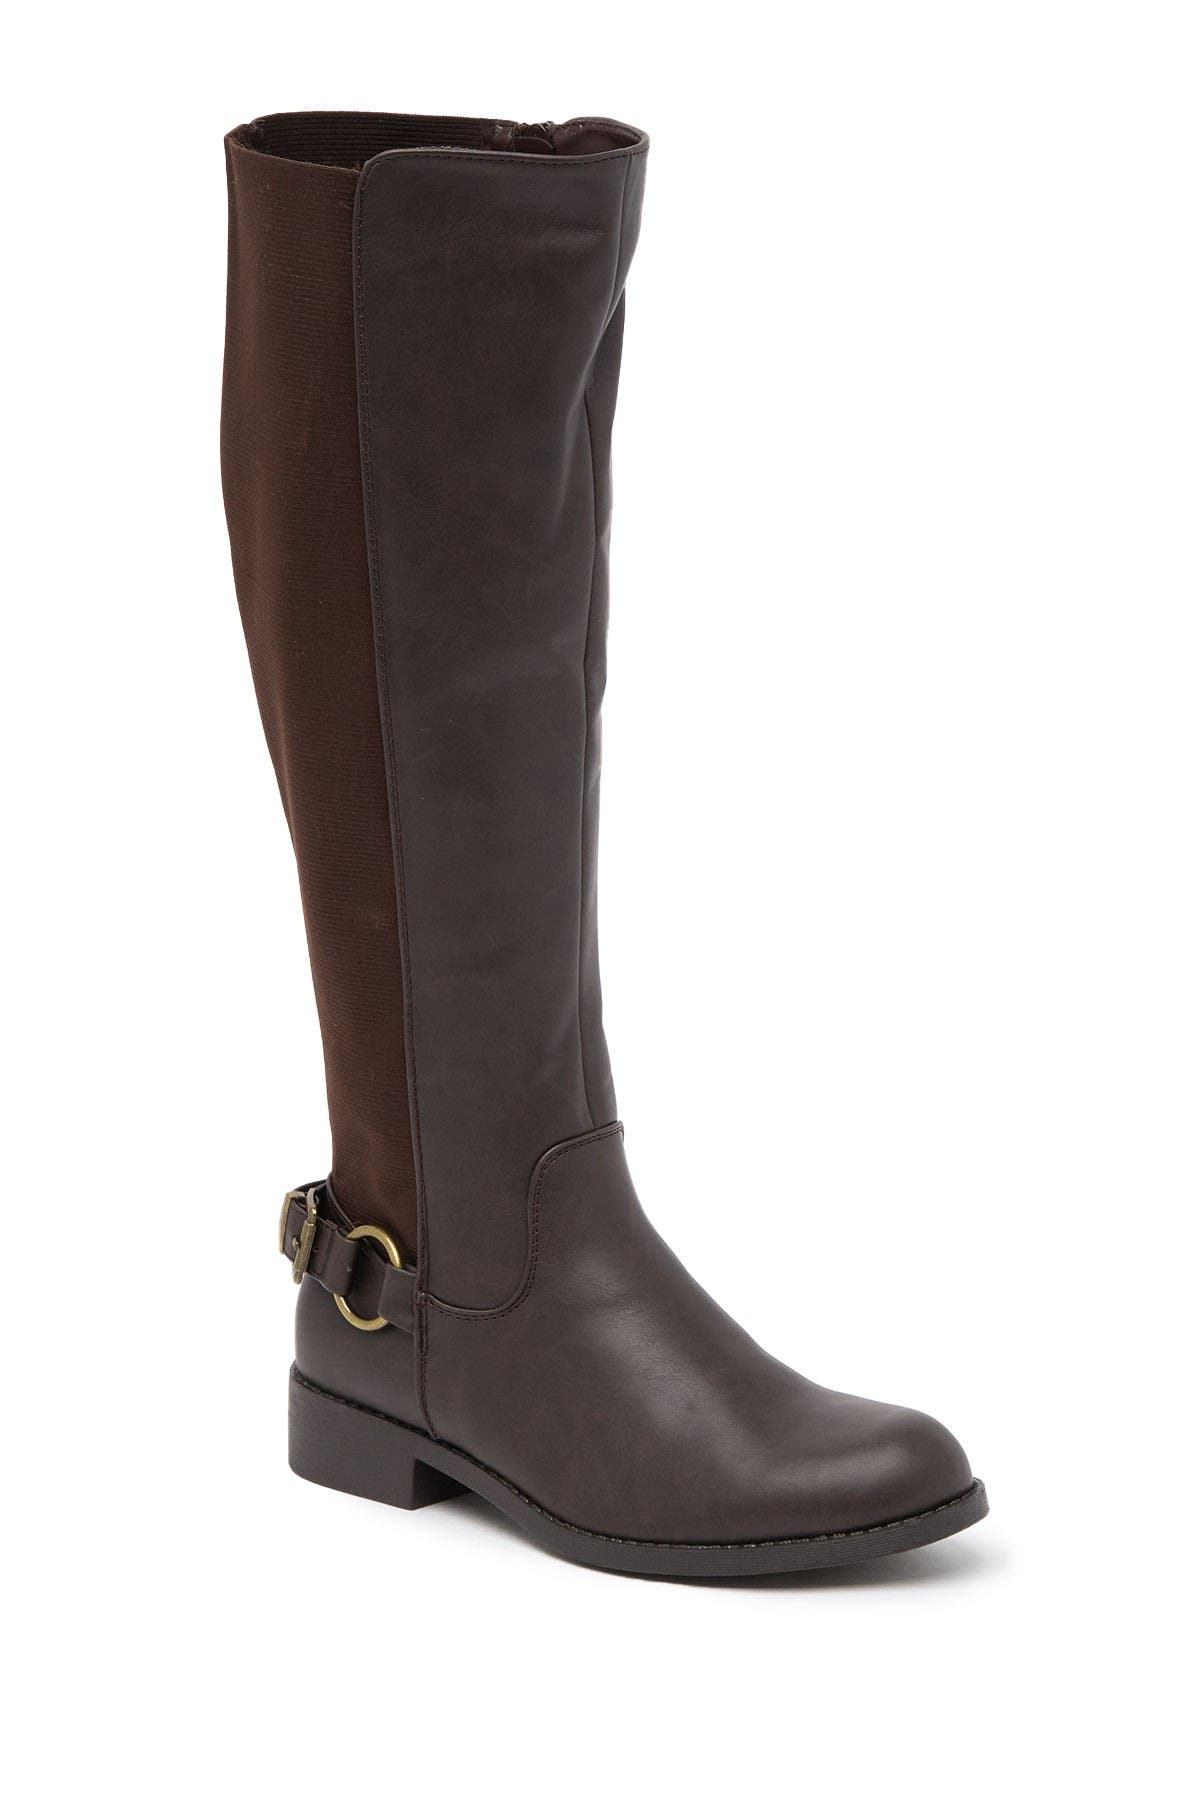 nordstrom rack tall boots